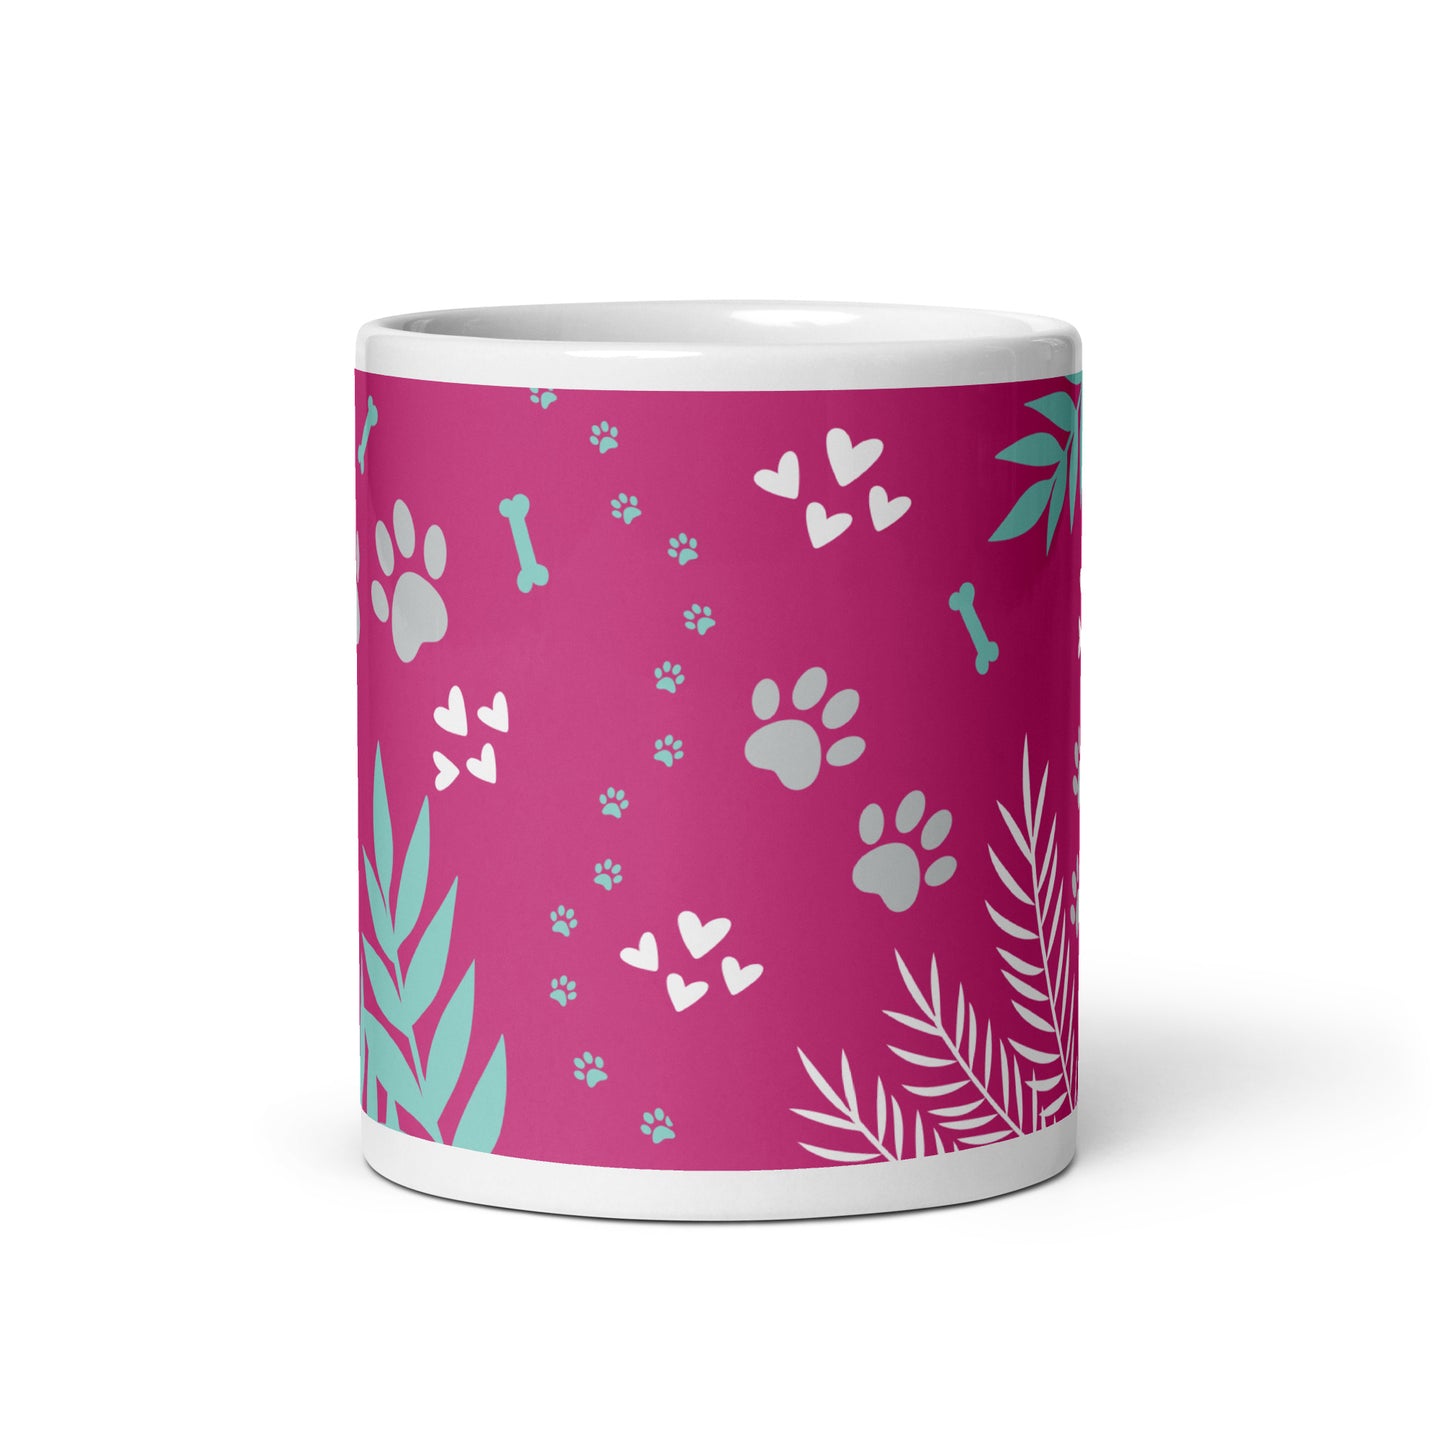 Signature Collection glossy mug in pink